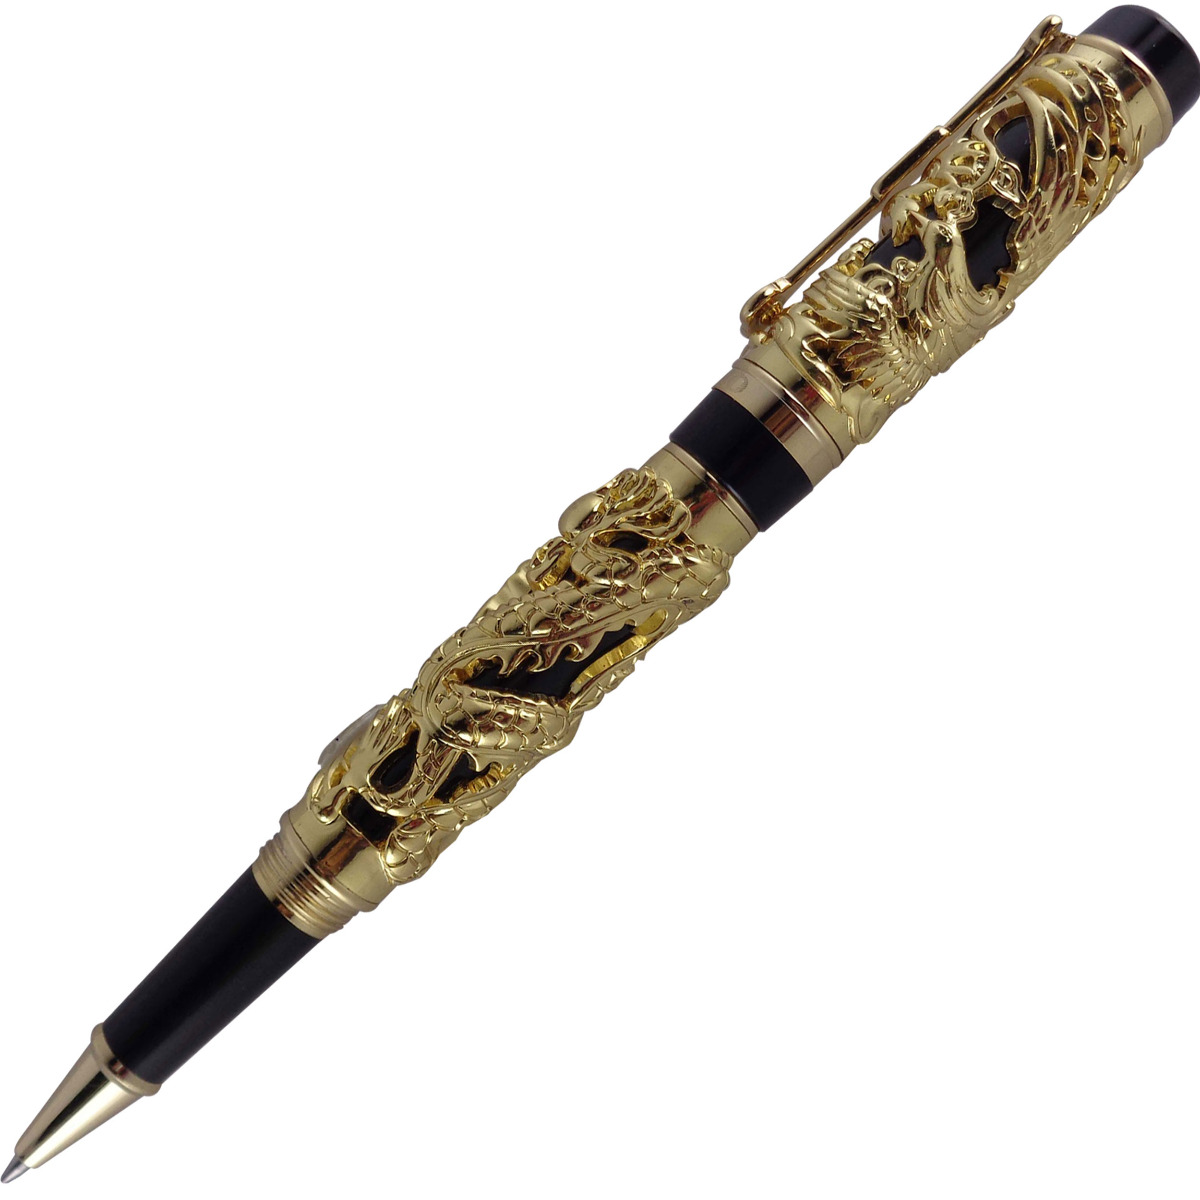 jinhao Model: 13824 Luxury gold color dragon phoenix pattern with 0.7mm tip cap type roller ball